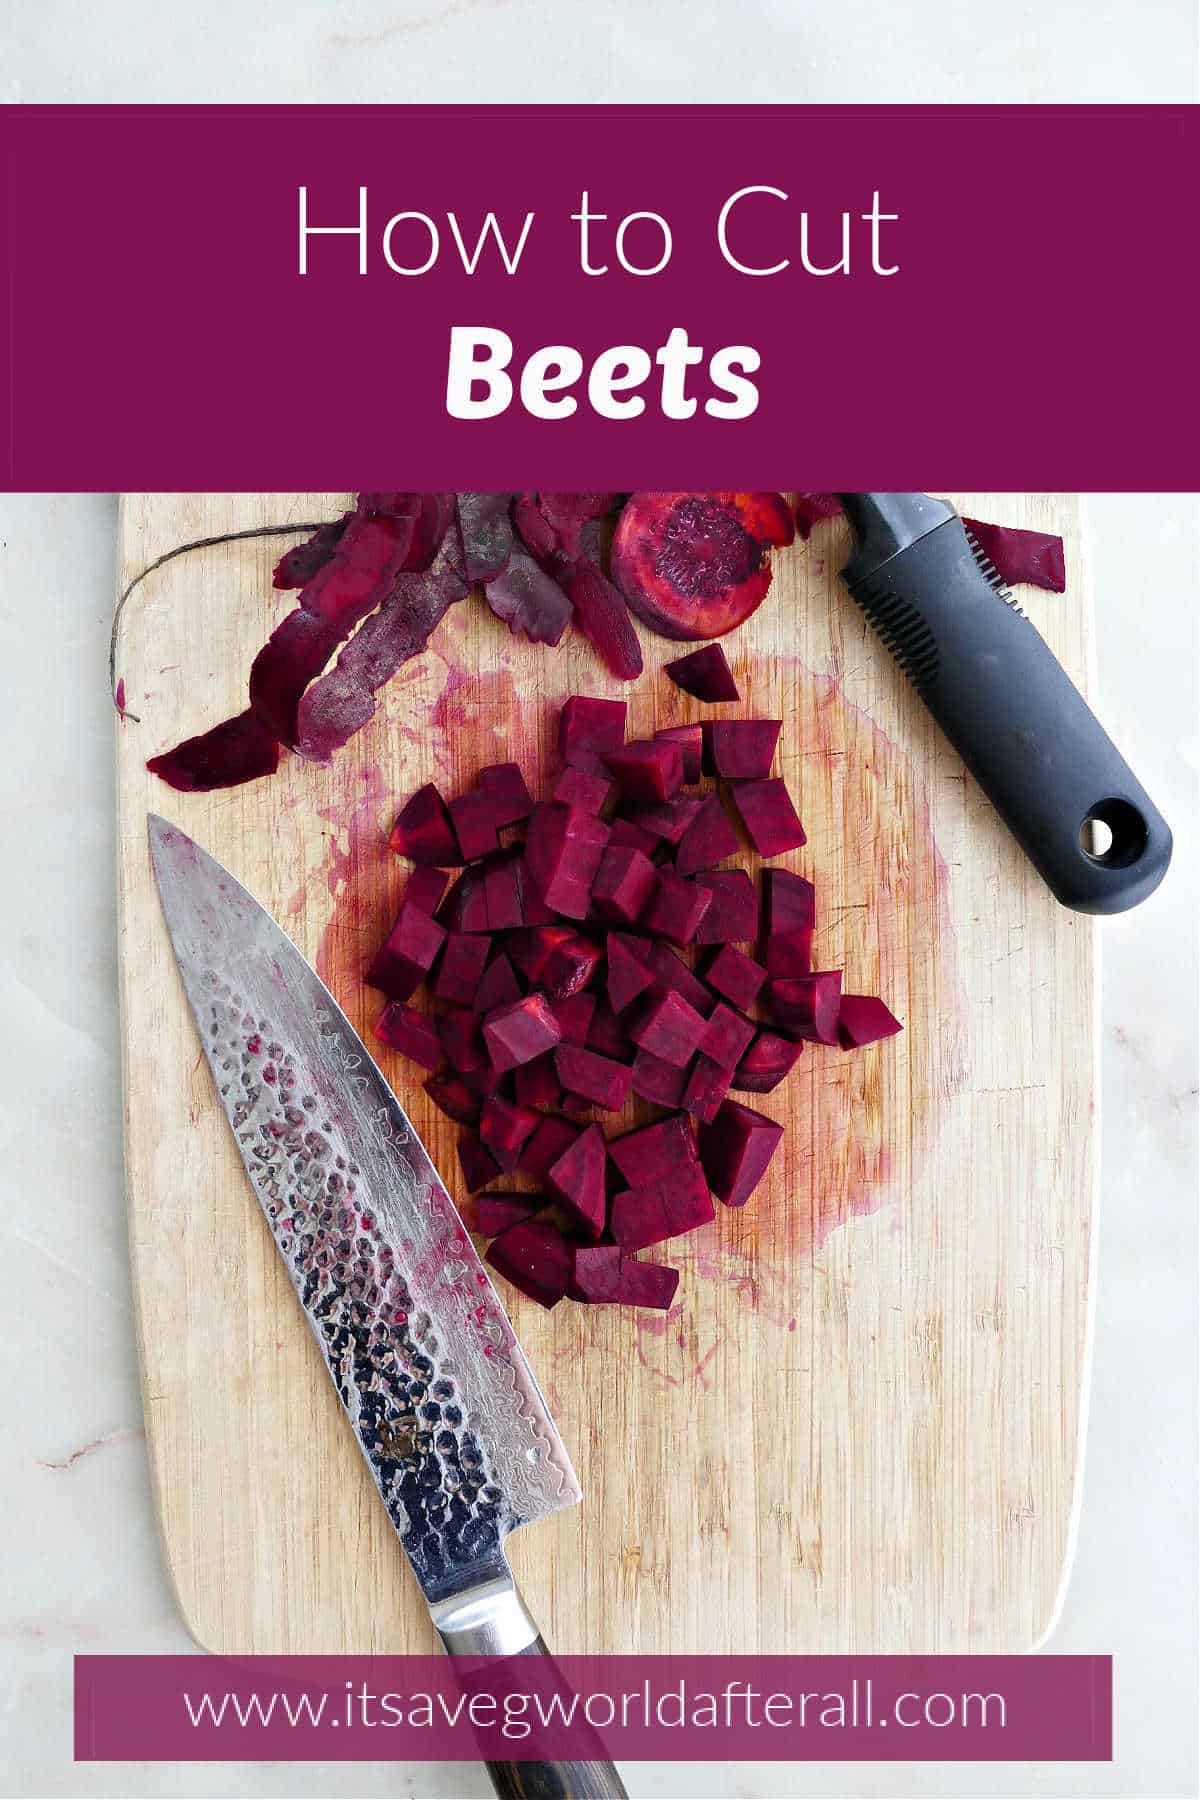 diced beets on a cutting board with text boxes for post name and website